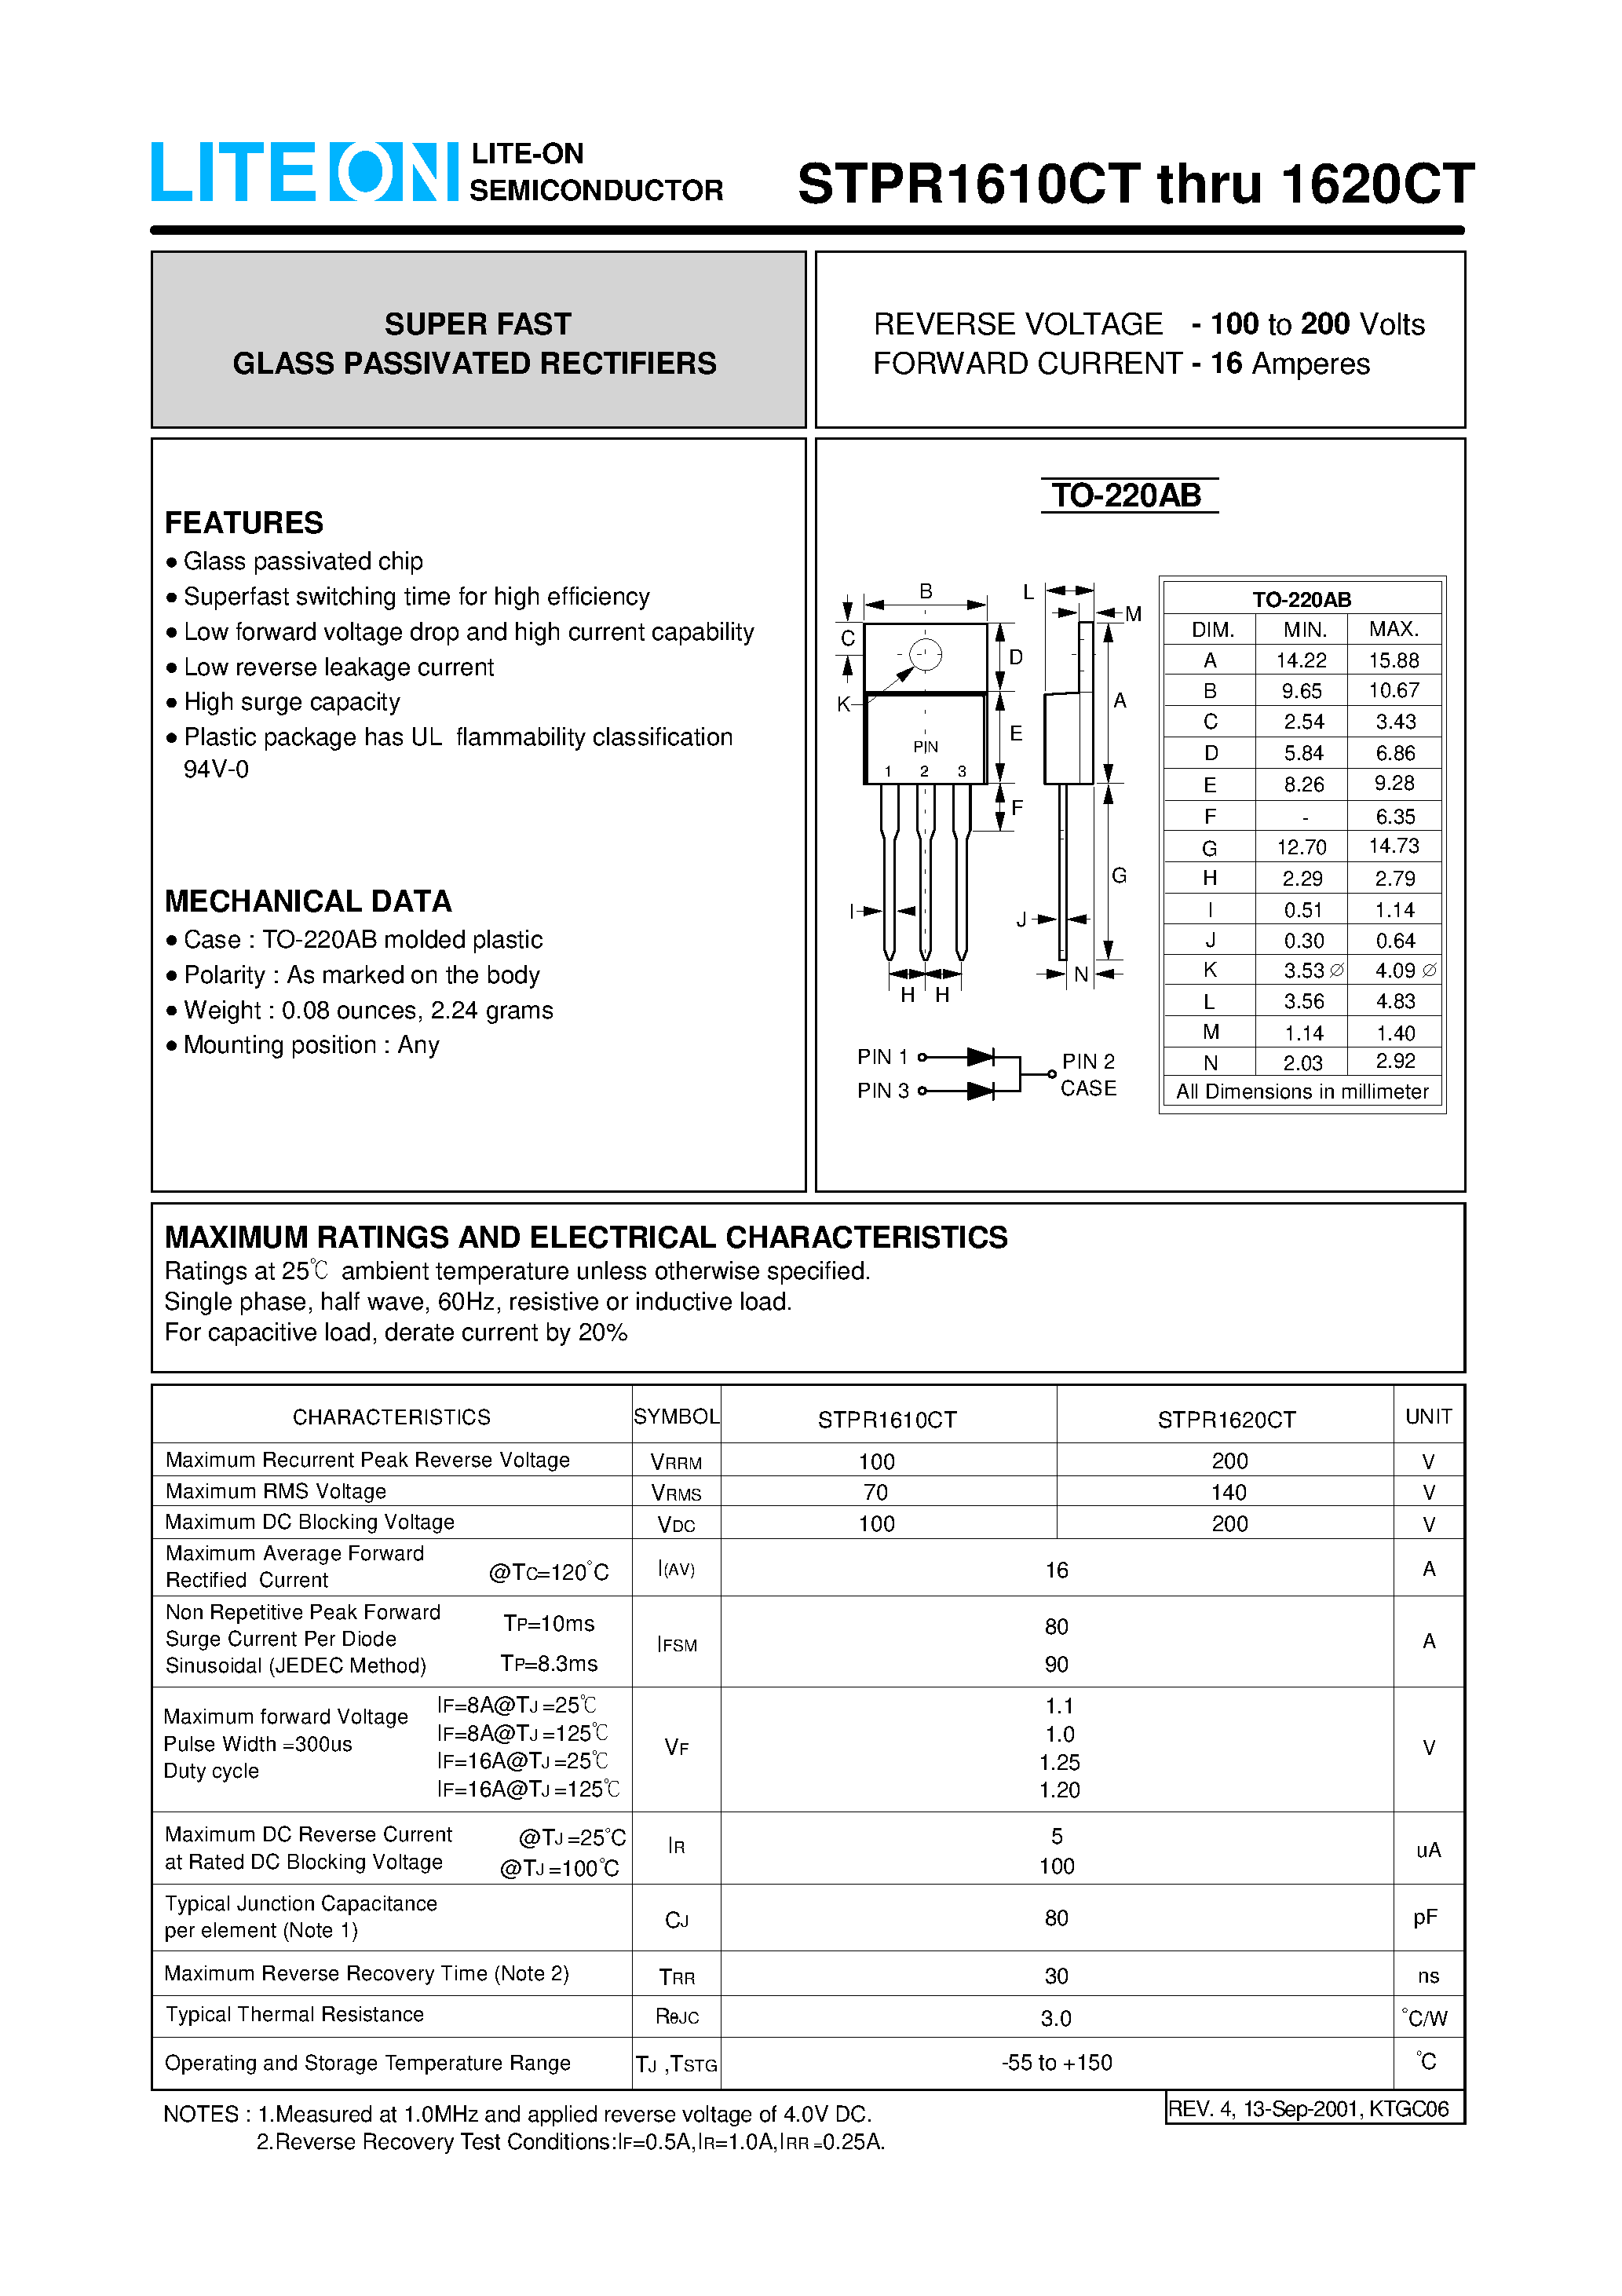 Datasheet STPR1610CT - (STPR1610CT / STPR1620CT) SUPER FAST GLASS PASSIVATED RECTIFIERS page 1